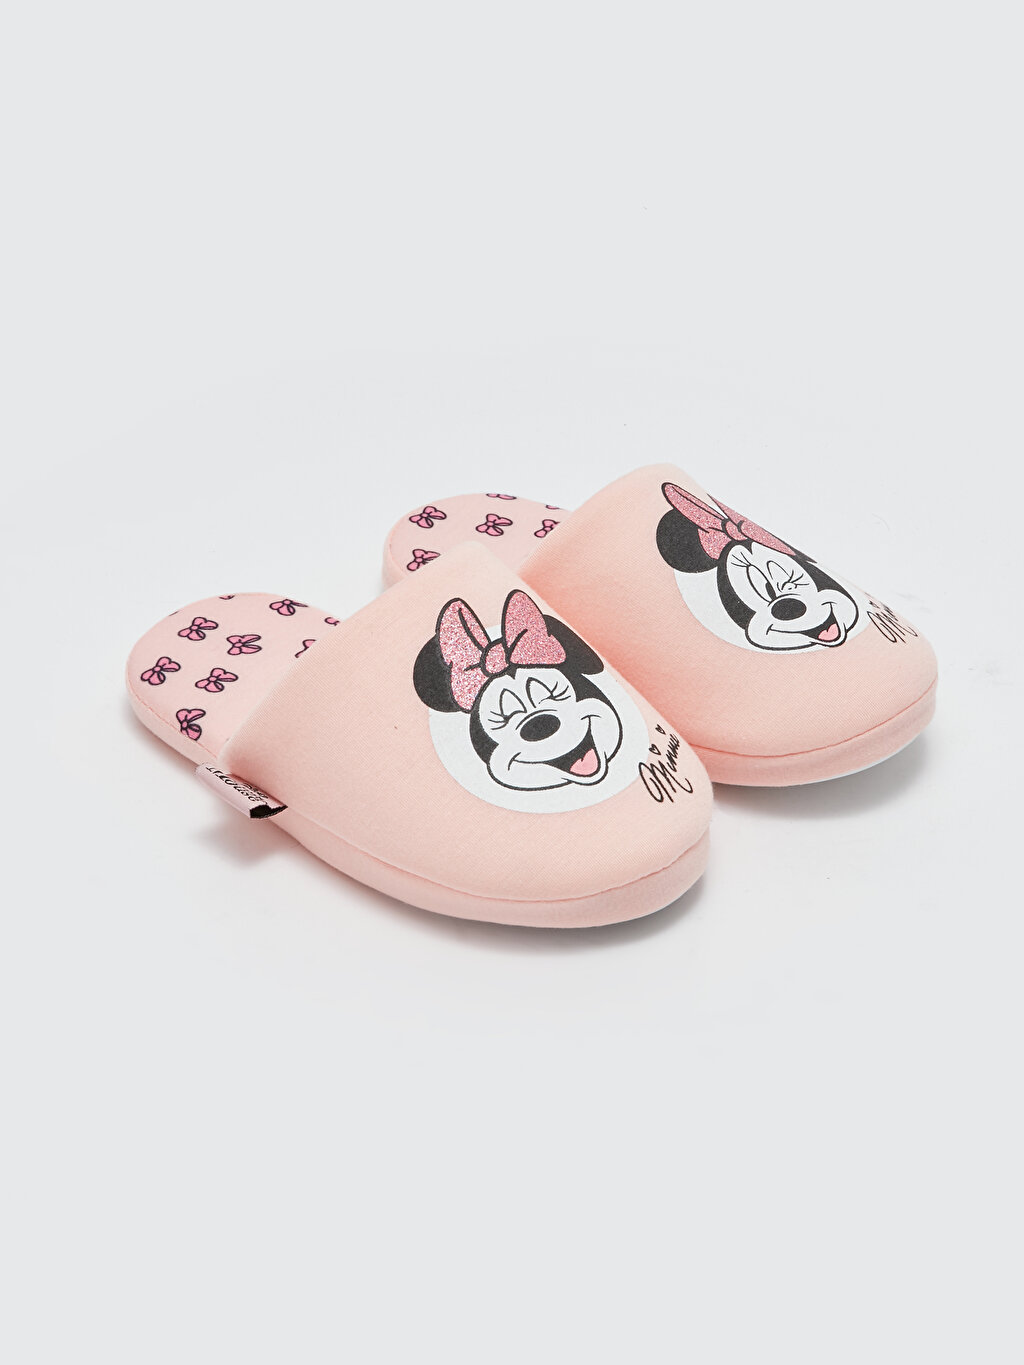 Disney Slippers for Women - Plush Minnie Mouse Shoes - Yello